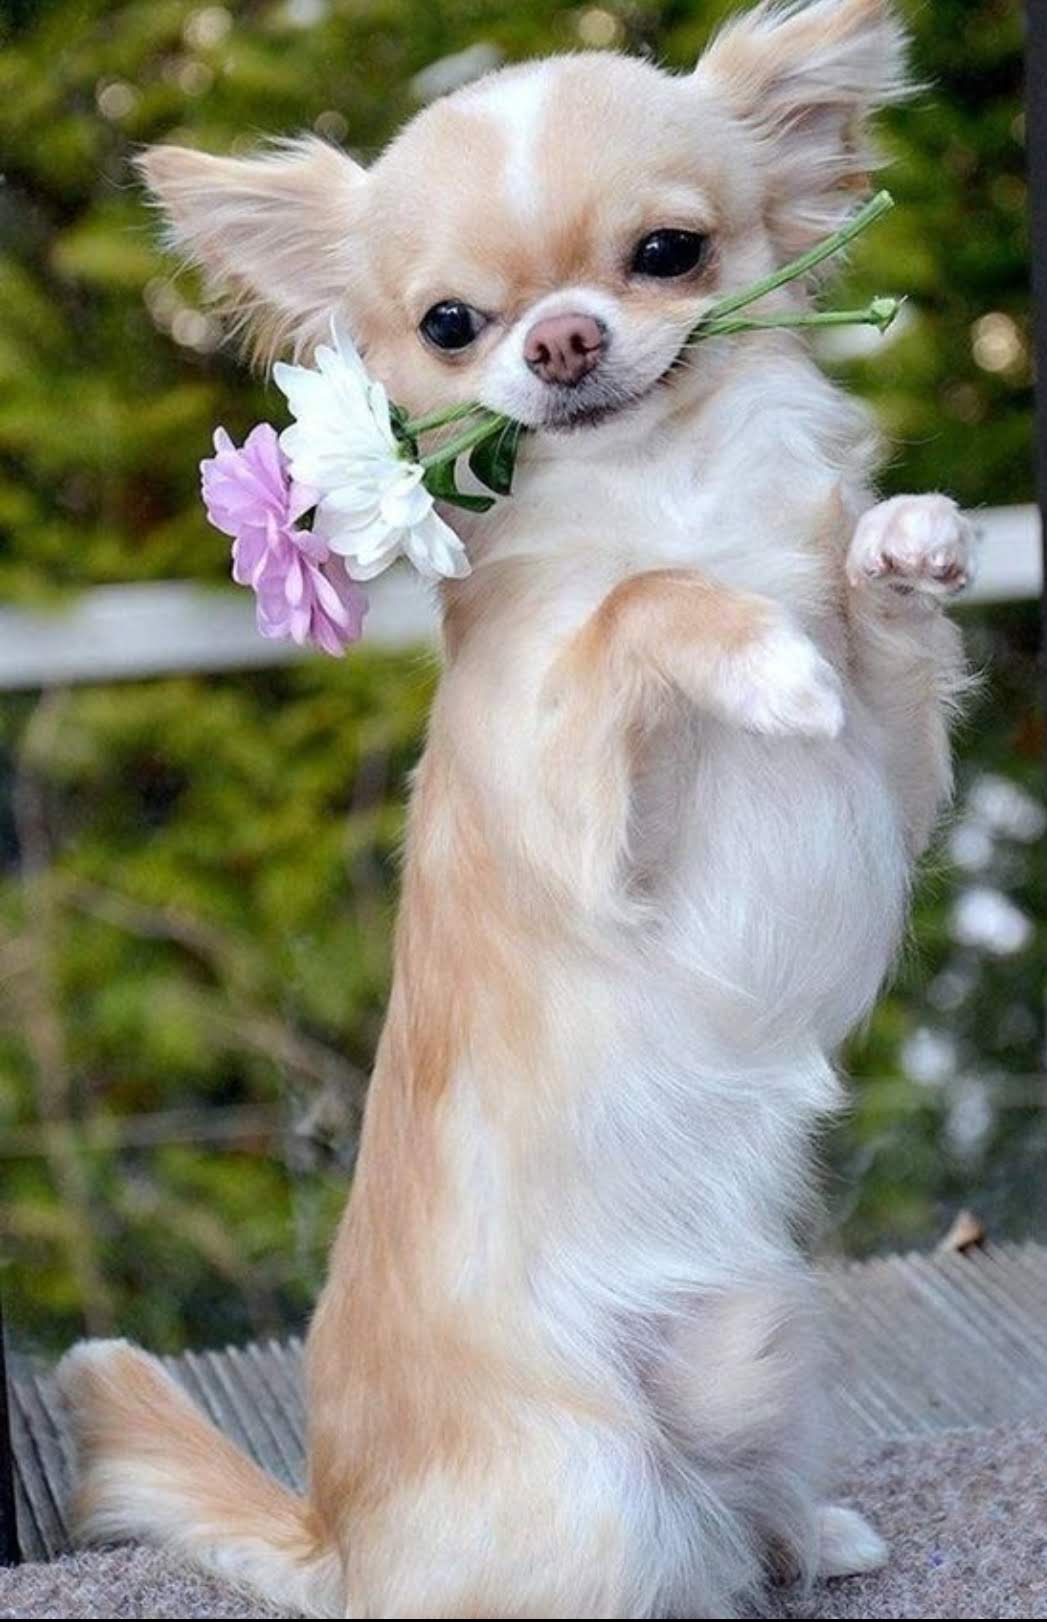 A Long Haired Chihuahua standing on the table with flowers in its mouth